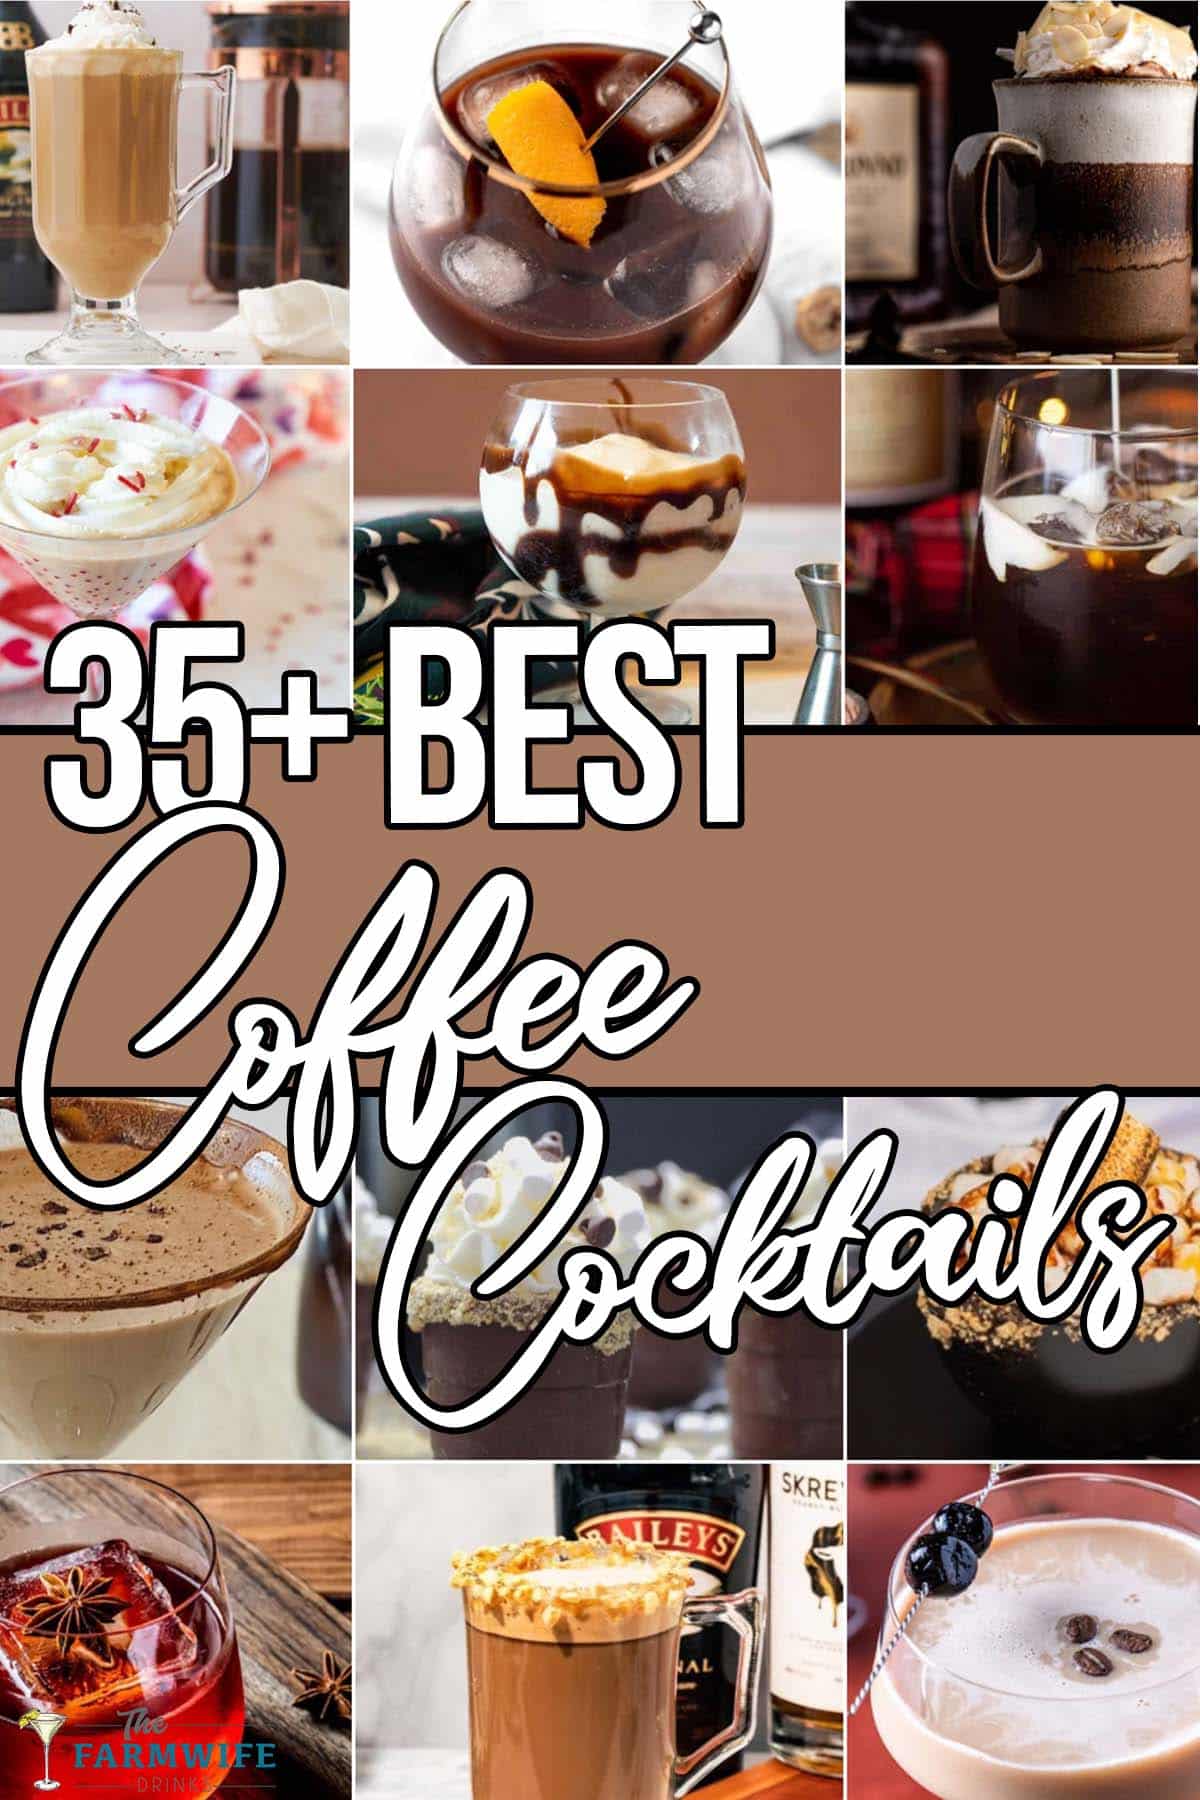 photo collage of adult coffee drink recipes with text which reads 35+ best coffee cocktails 